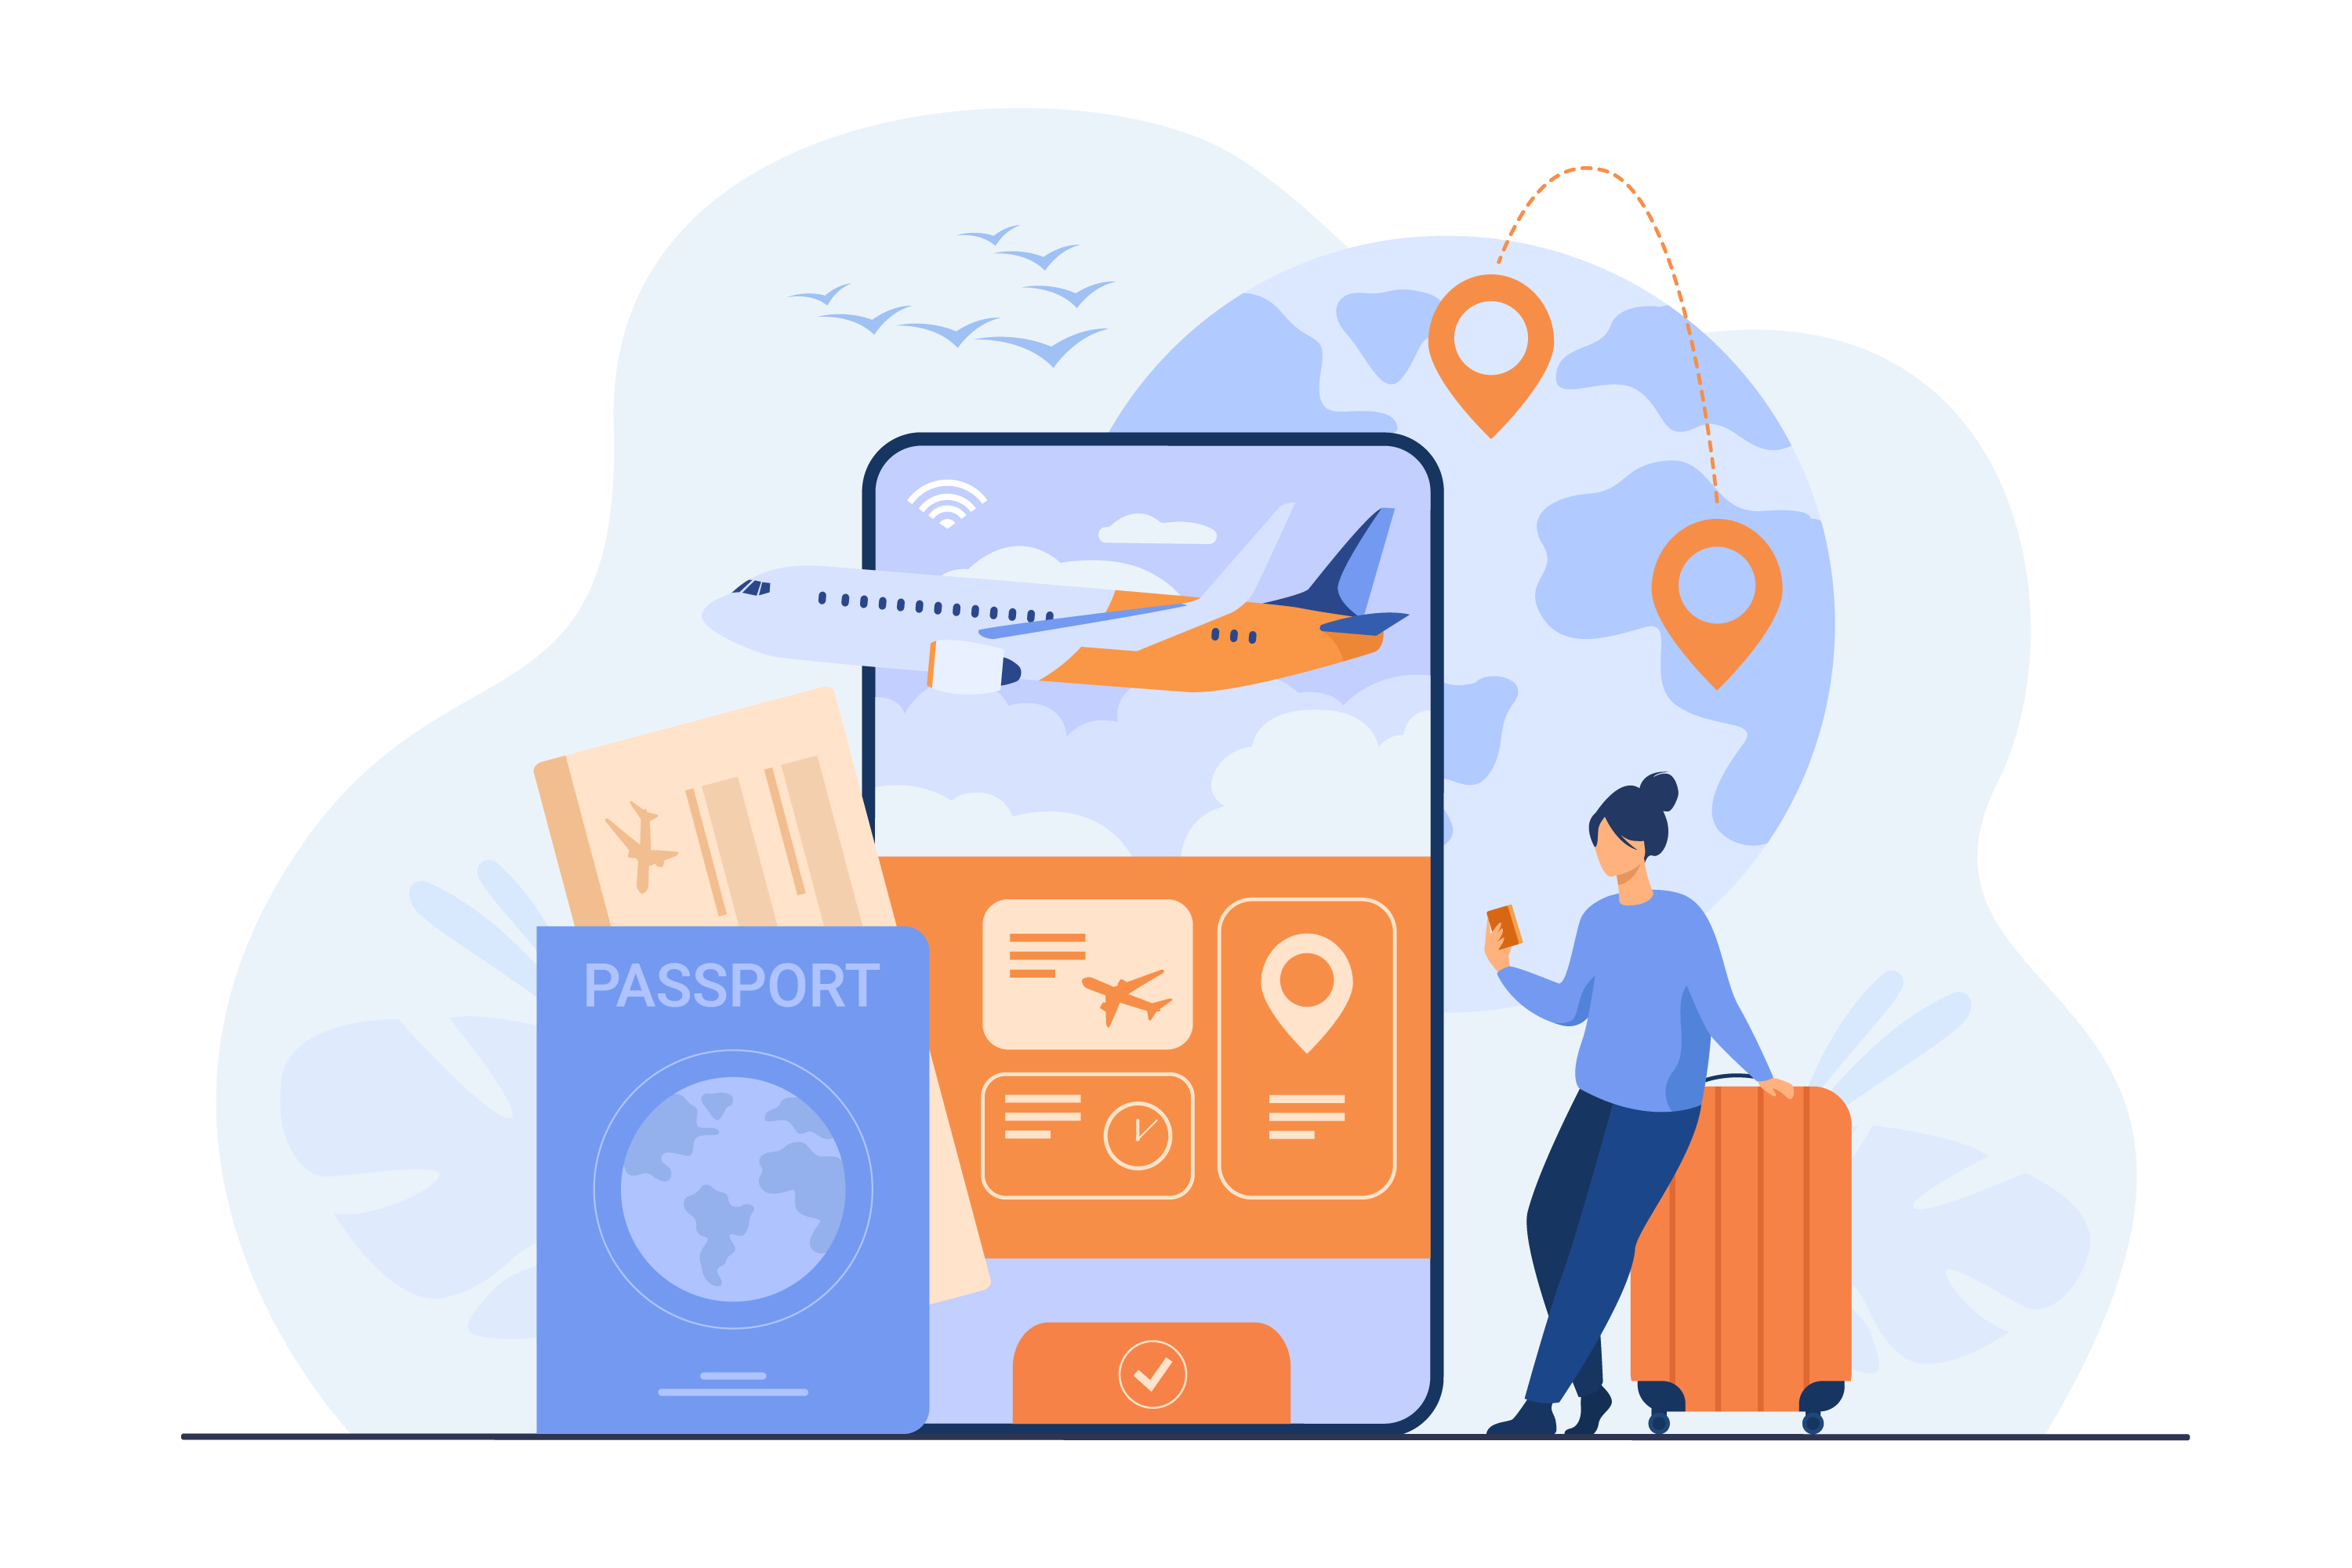 Illustration of a person traveling with a passport and phone